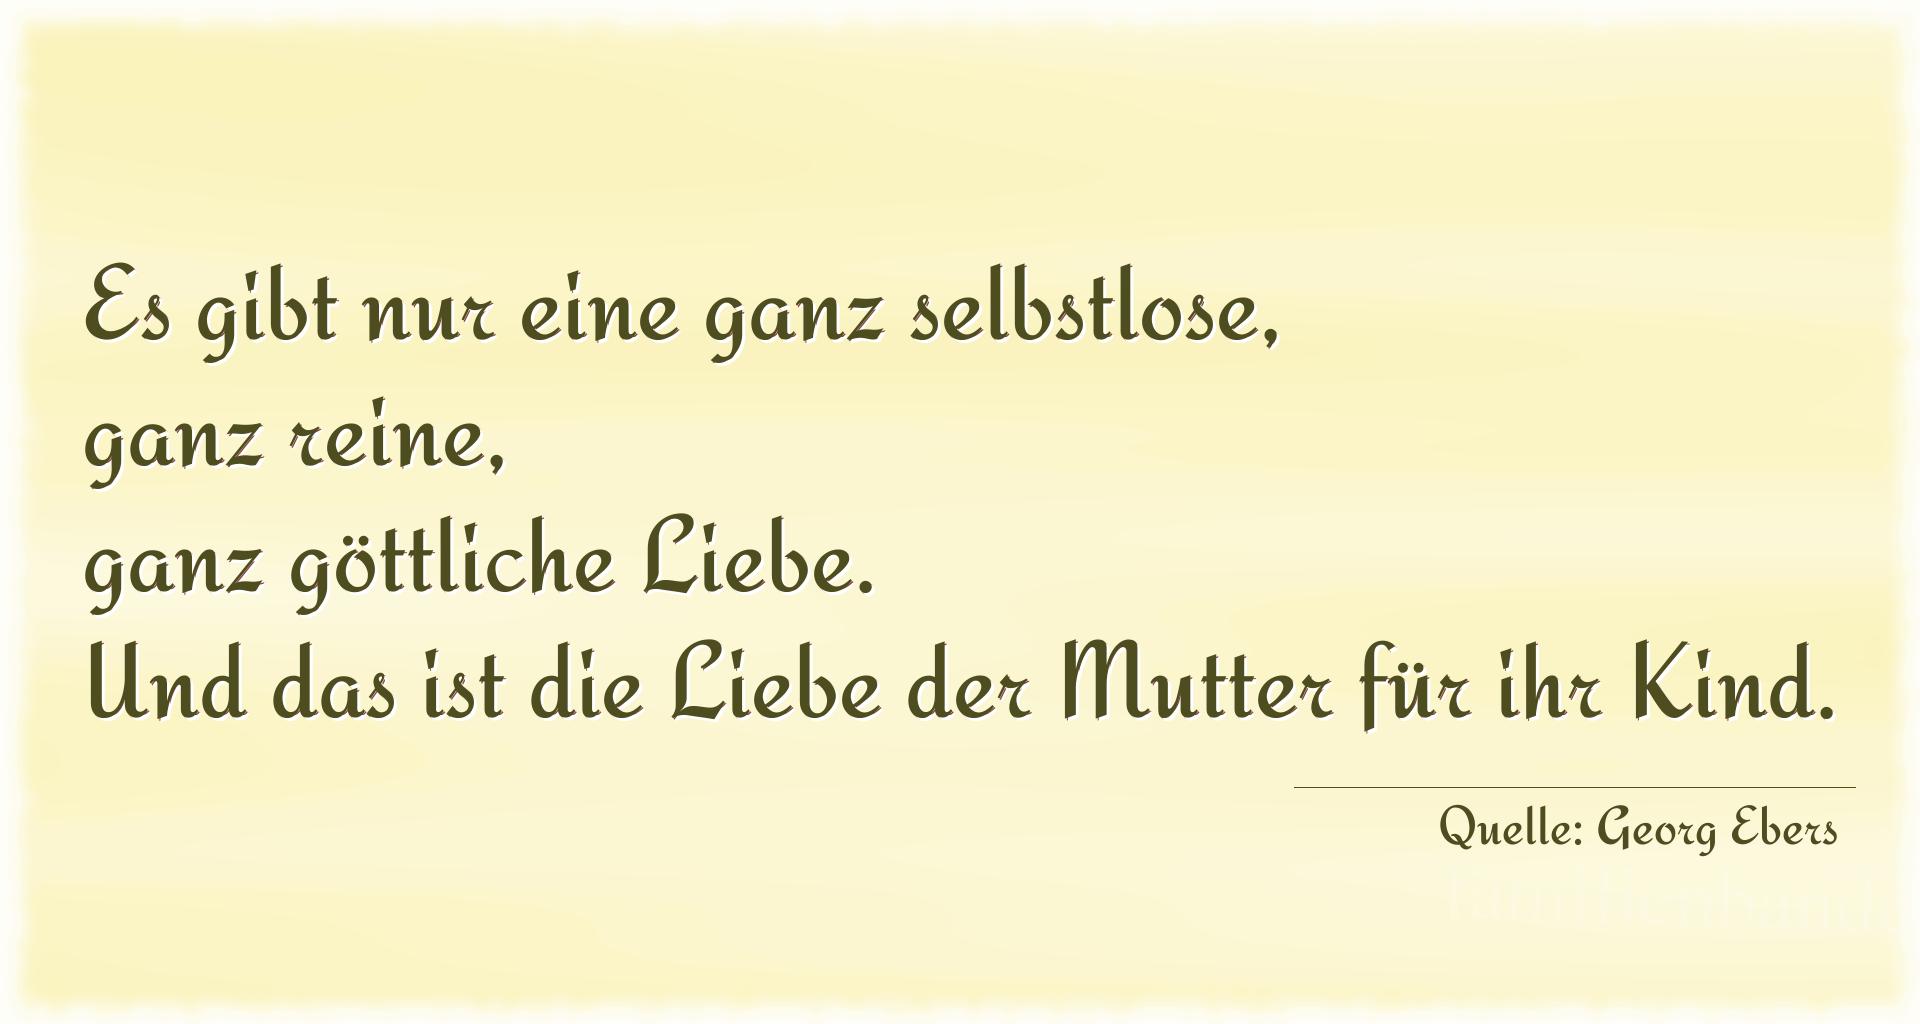 Familienspruch Nr. 357, Quelle Georg Ebers